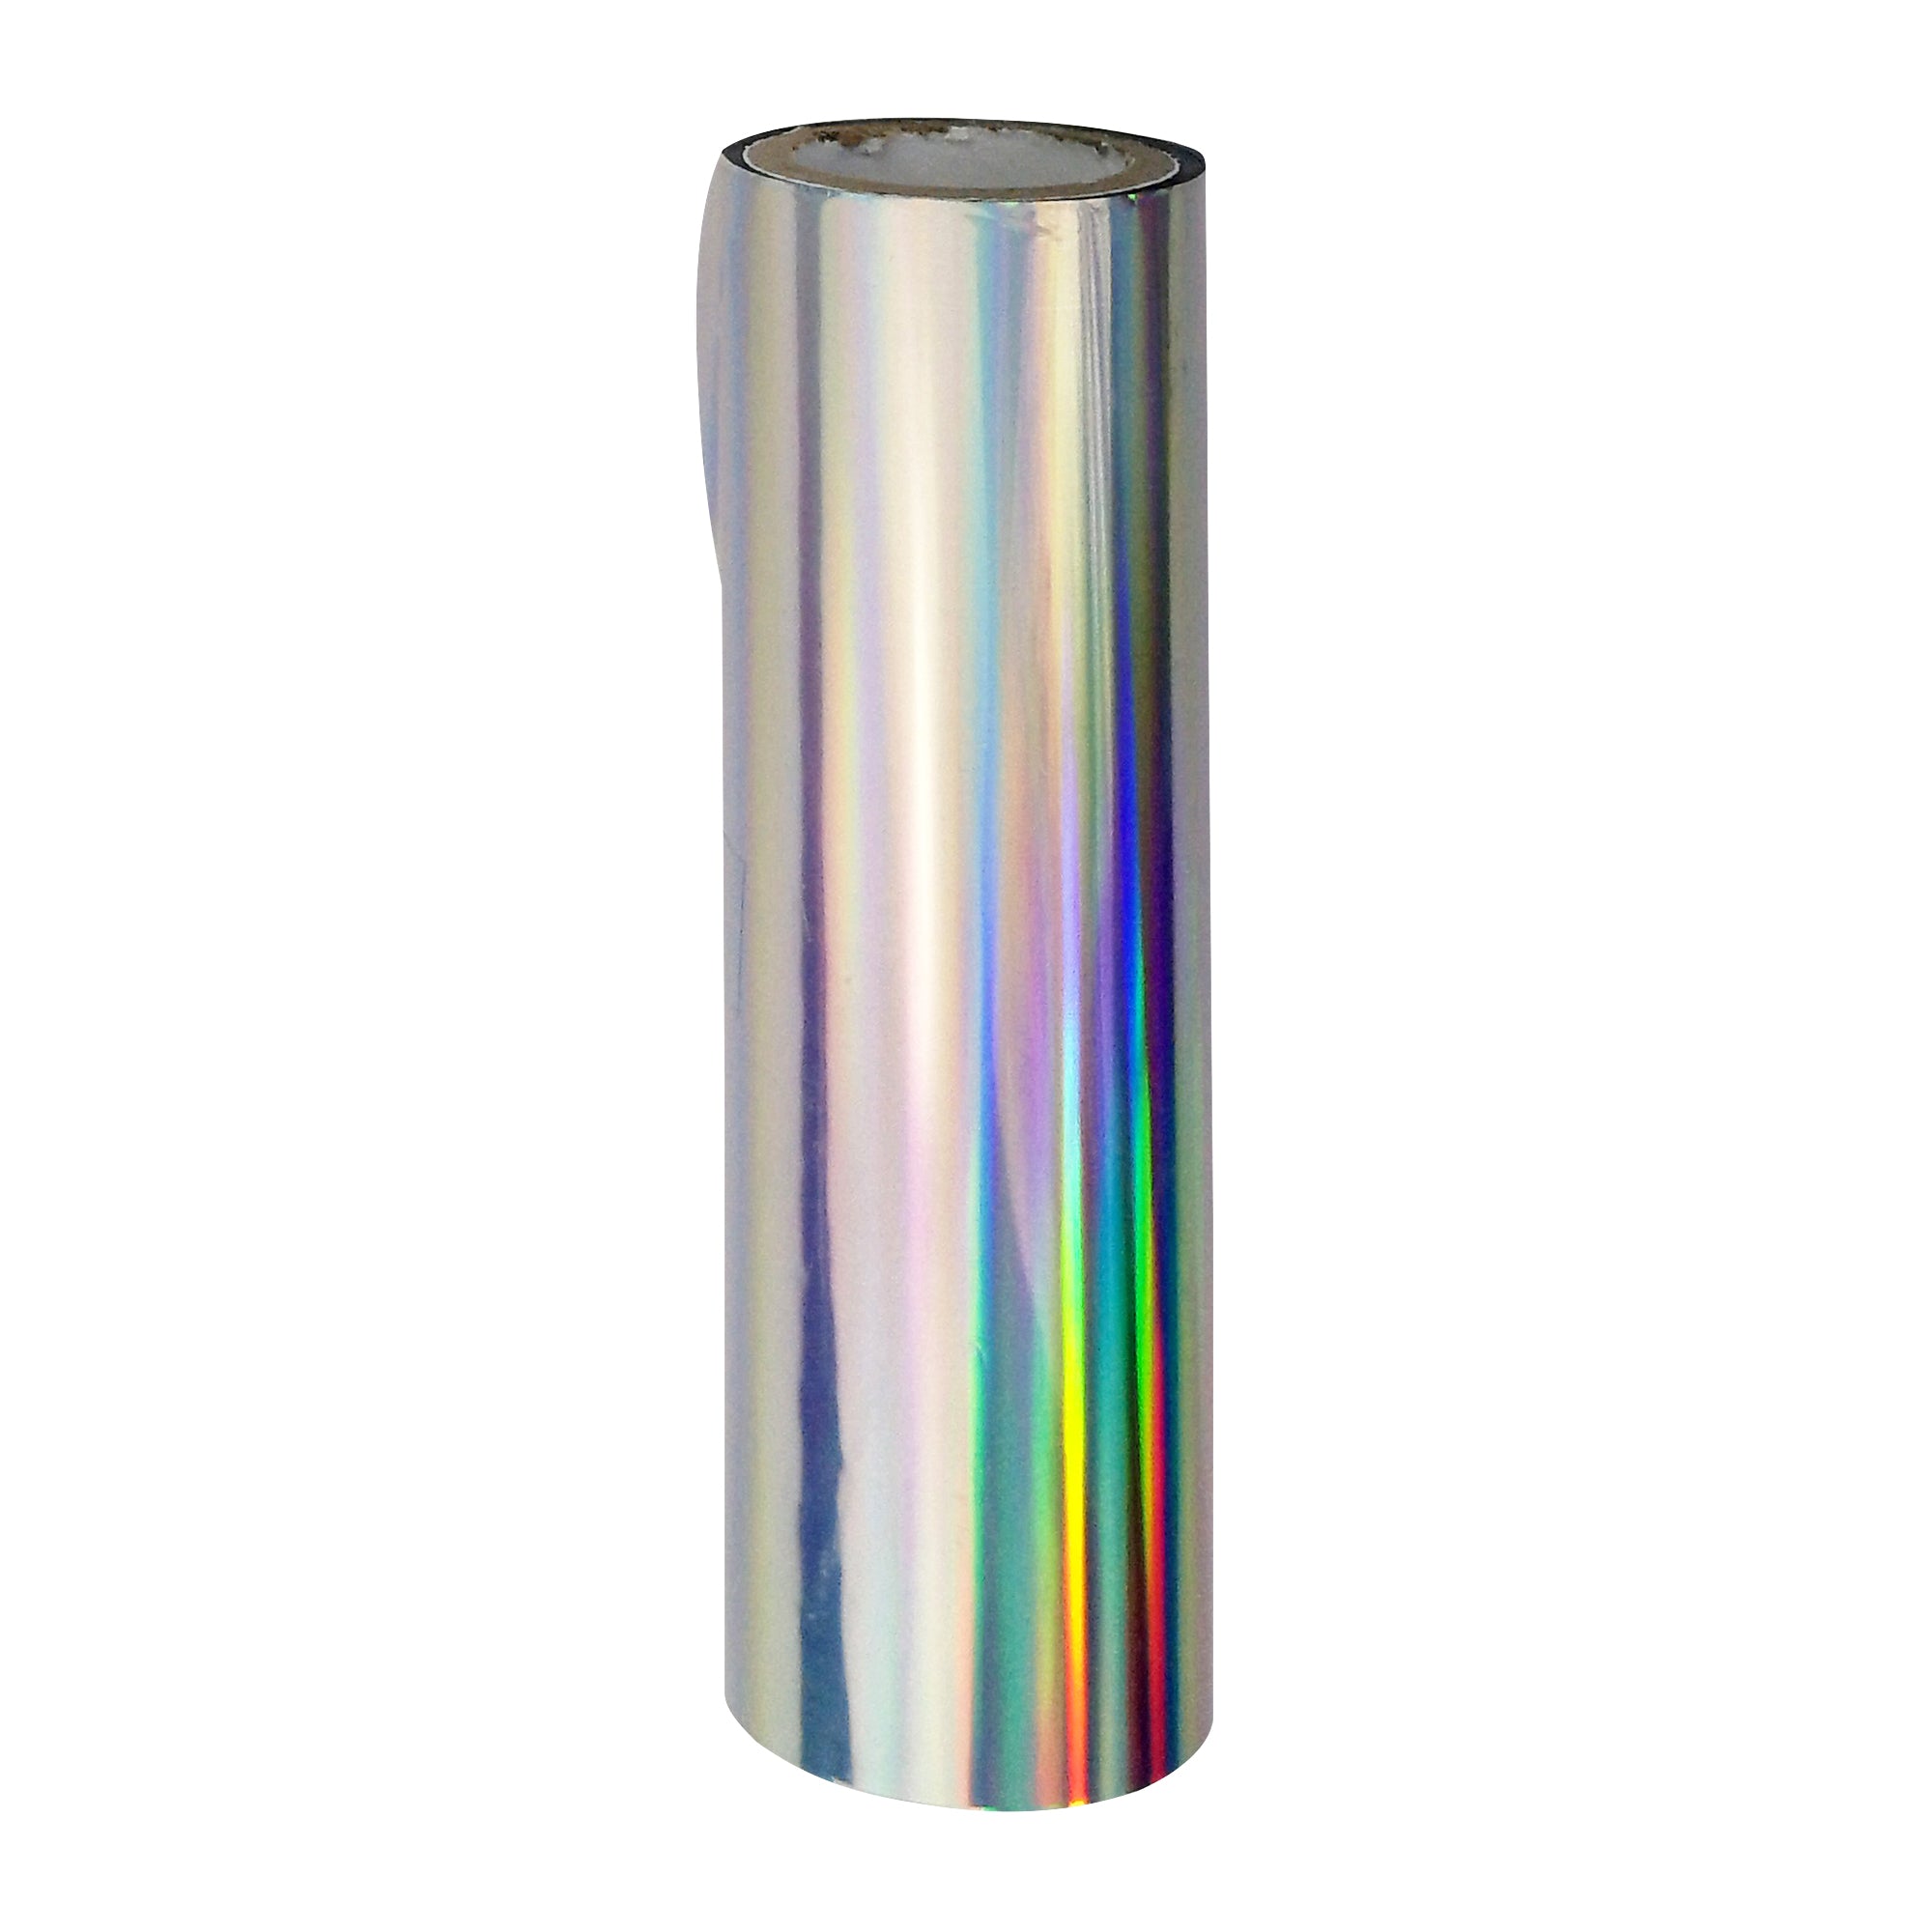 Holographic Silver Toner Foil is a metallic foil that has been coated with holographic silver ink or toner. Holographic silver is a colour made by blending silver with a rainbow of colours to produce a three-dimensional effect.